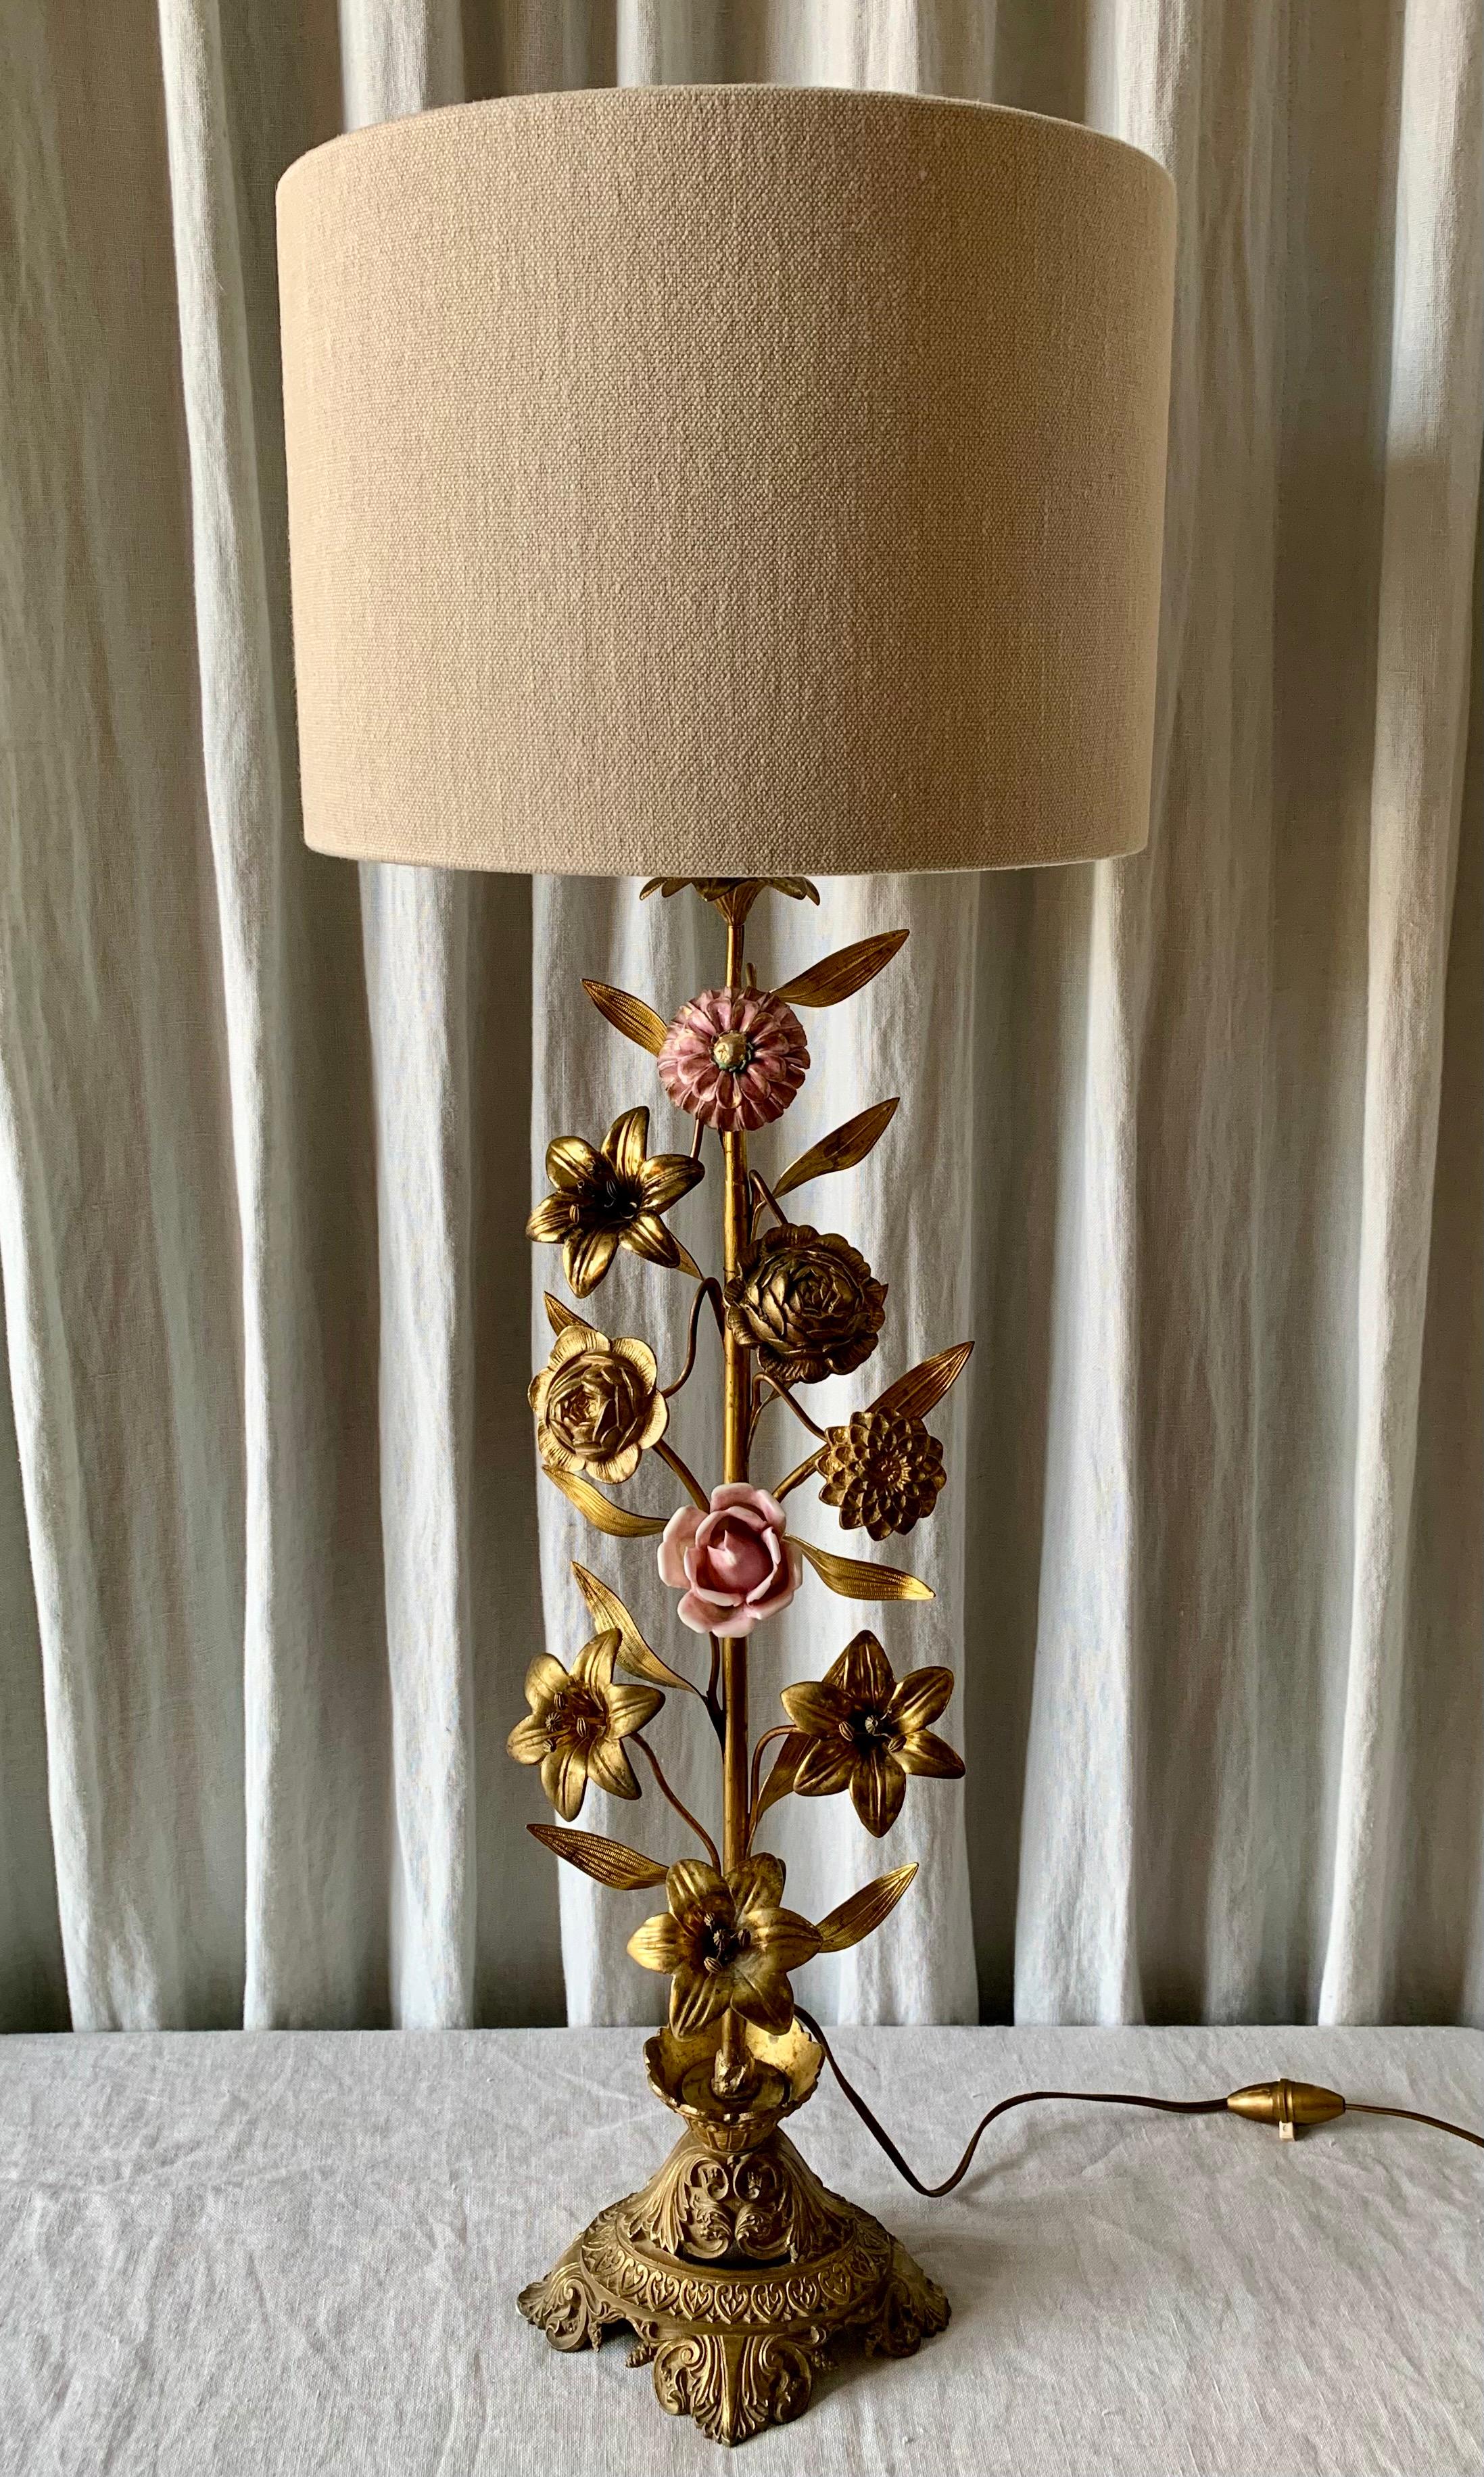 Wonderful antique French church candelabra - at some point in history transformed into a table lamp - newly made shade.